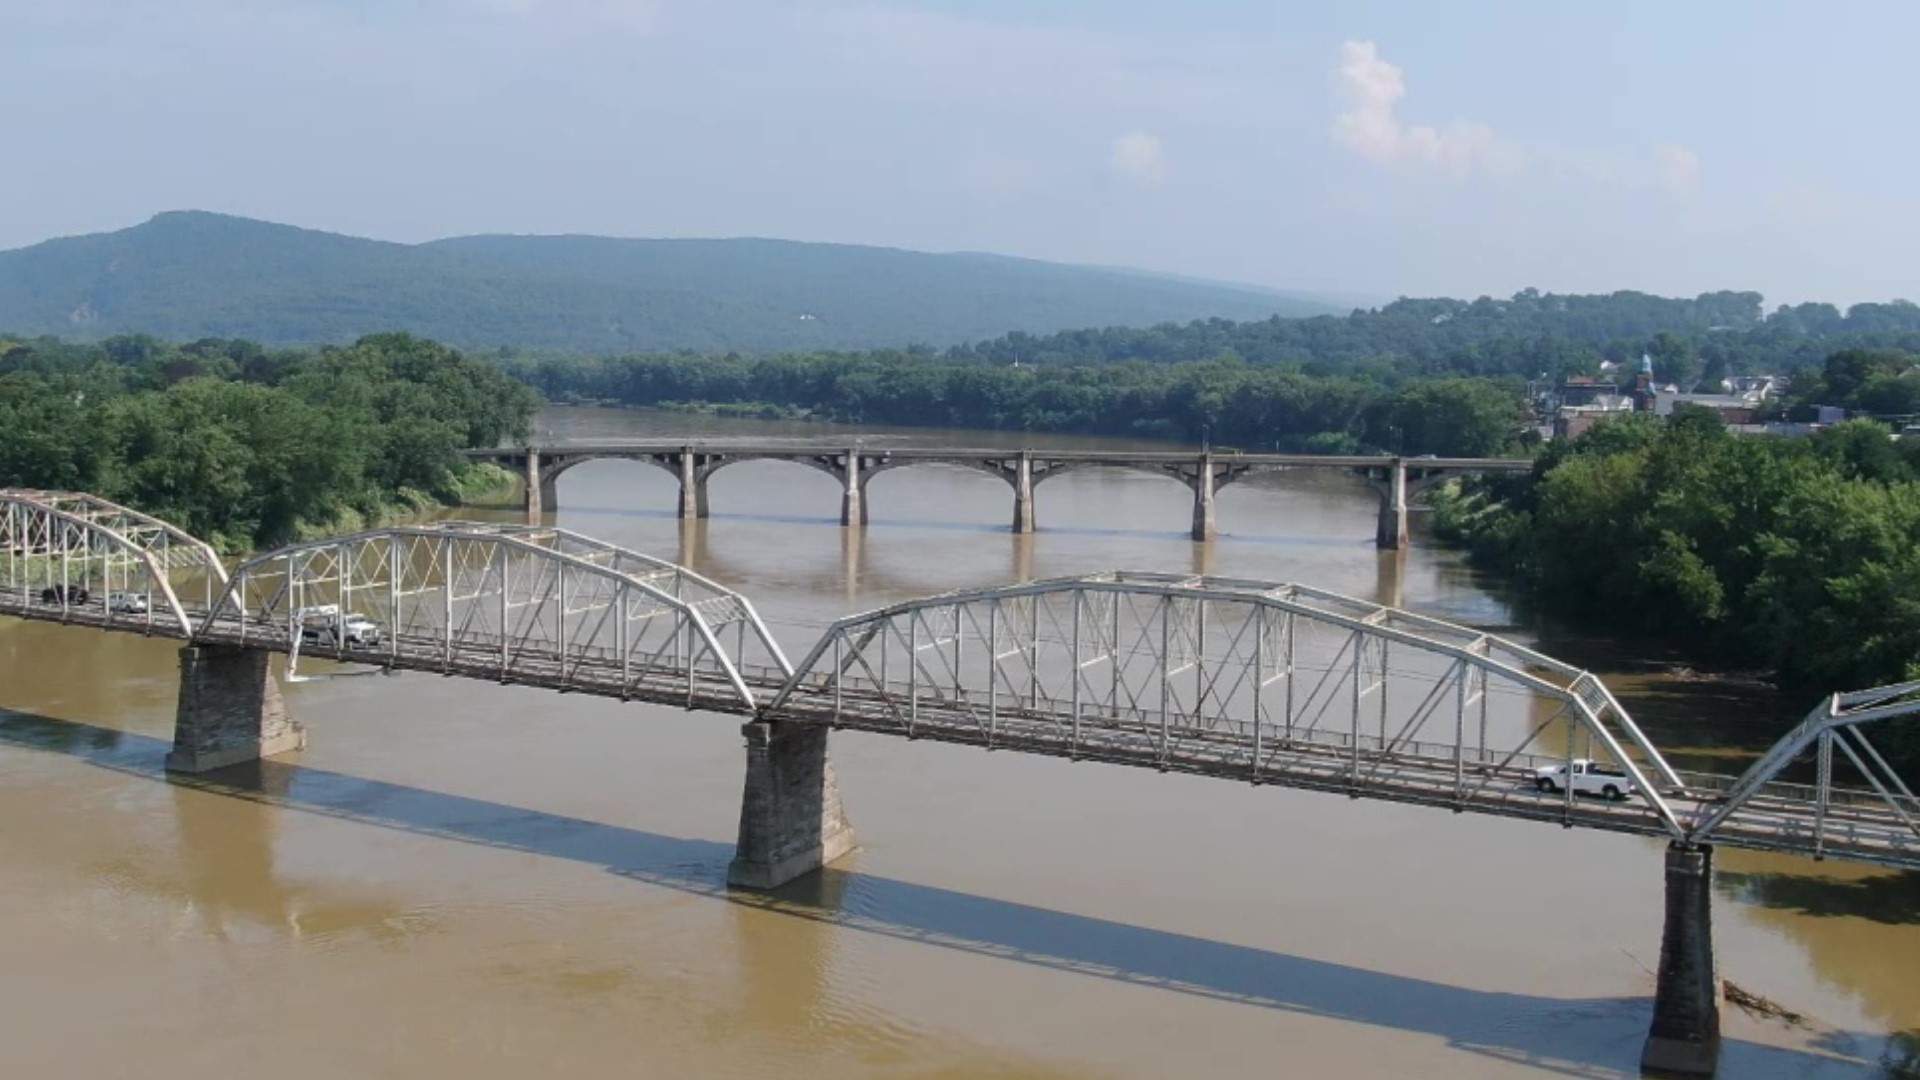 Sen. Bob Casey and Rep. Matt Cartwright reaffirmed the funding and commitment to replace the spans in Luzerne County.